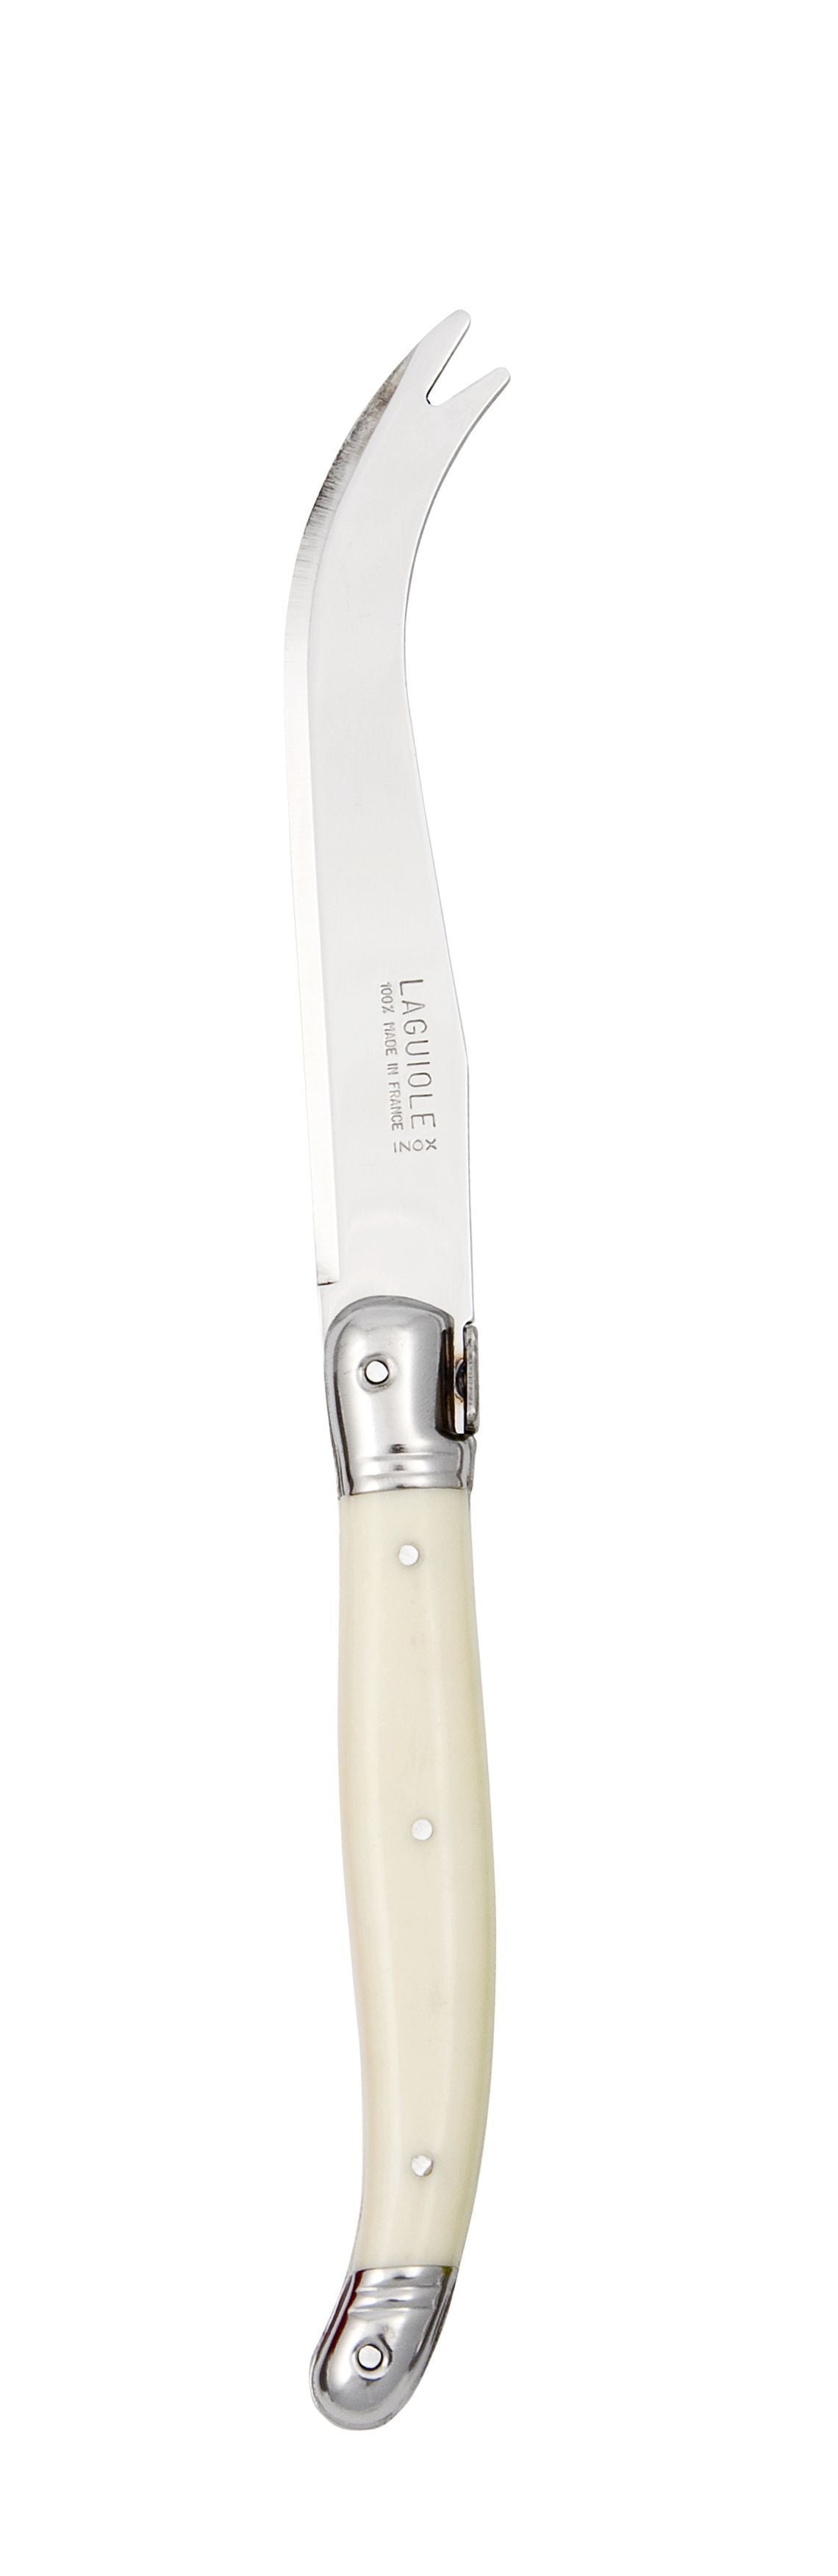 Debutant Cheese Knife | Ivory Laguiole by Andre Verdier